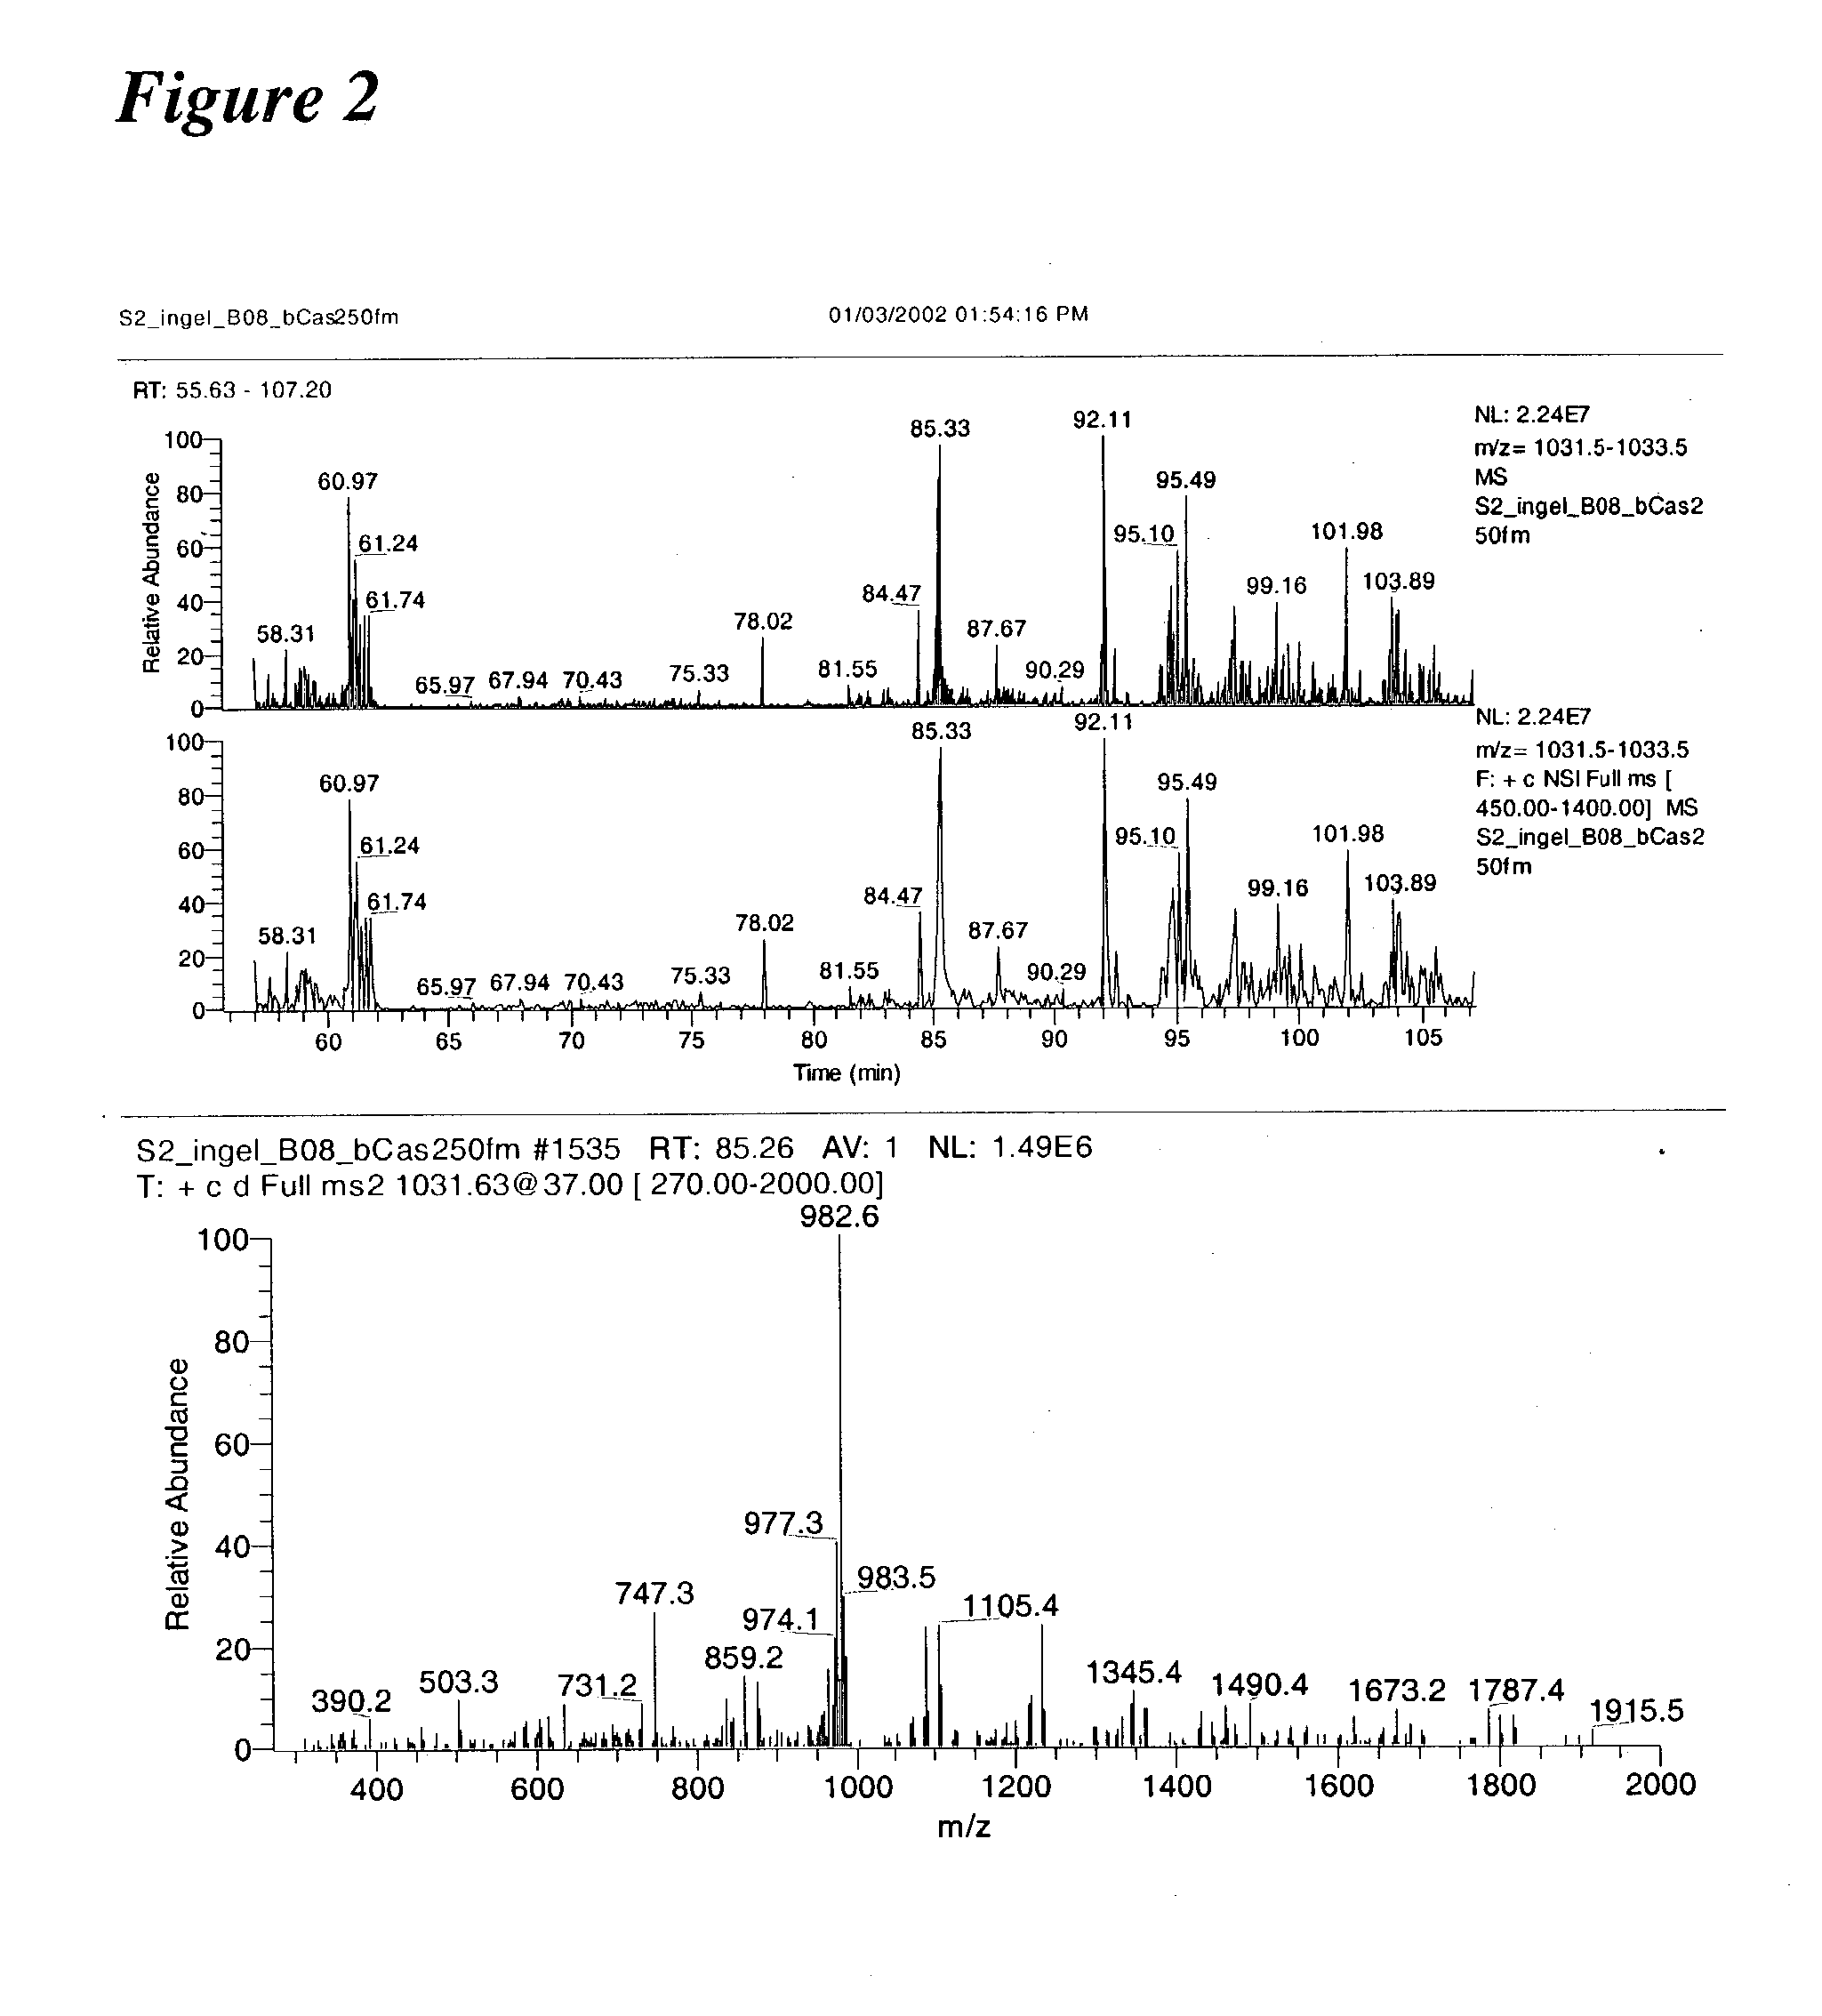 Automated systems and methods for analysis of protein post-translational modification